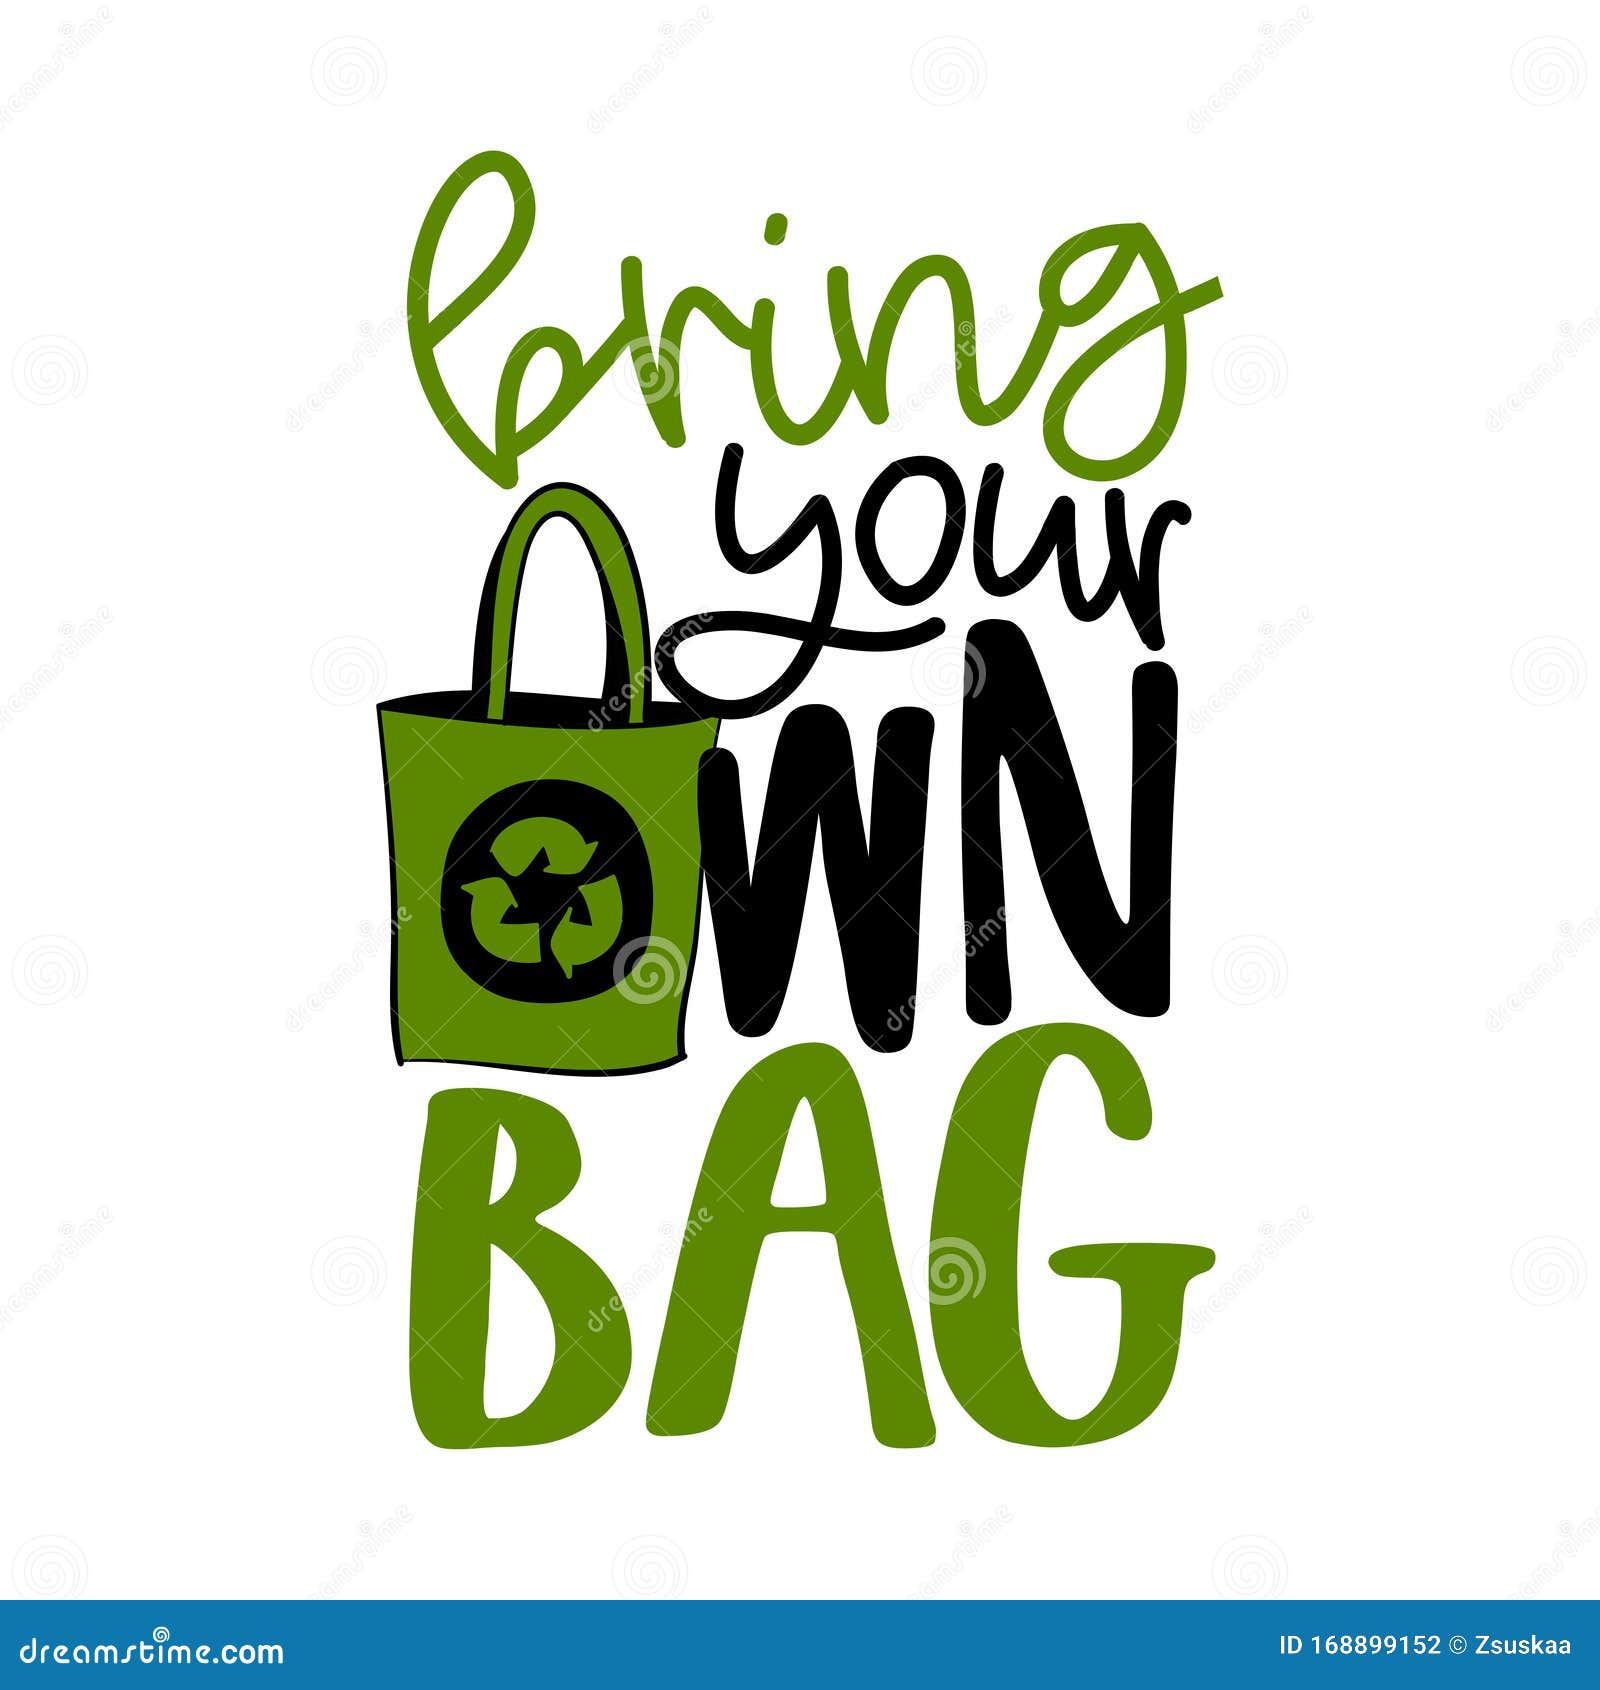 bring your own bag - handwritten quotes and reusable textile shopping bag dawning.